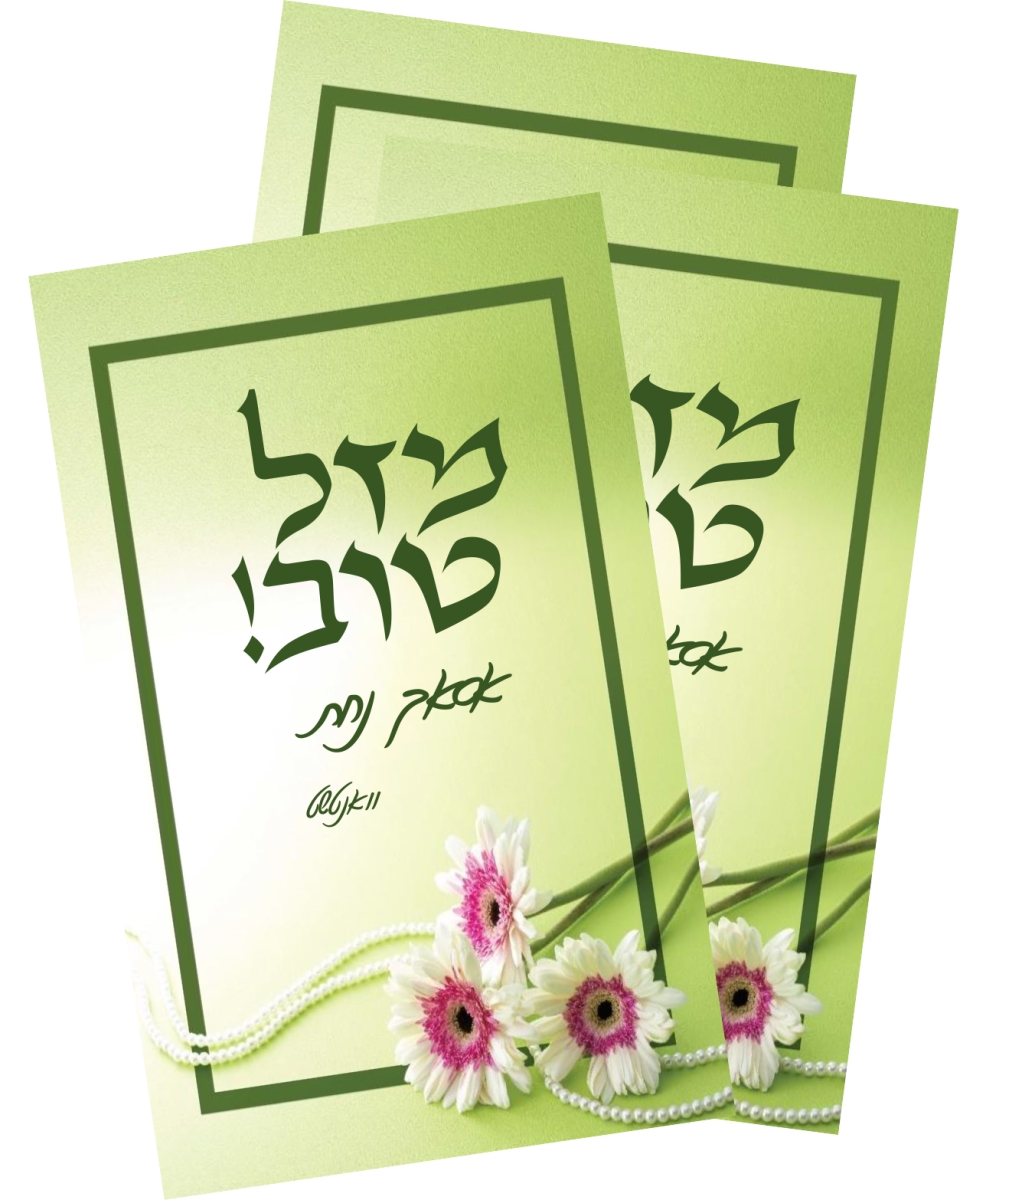 Picture of Mitzvah Friends F6194 4 x 2.5 in. Mazel Tov Small Card Tefilos - Pack of 5